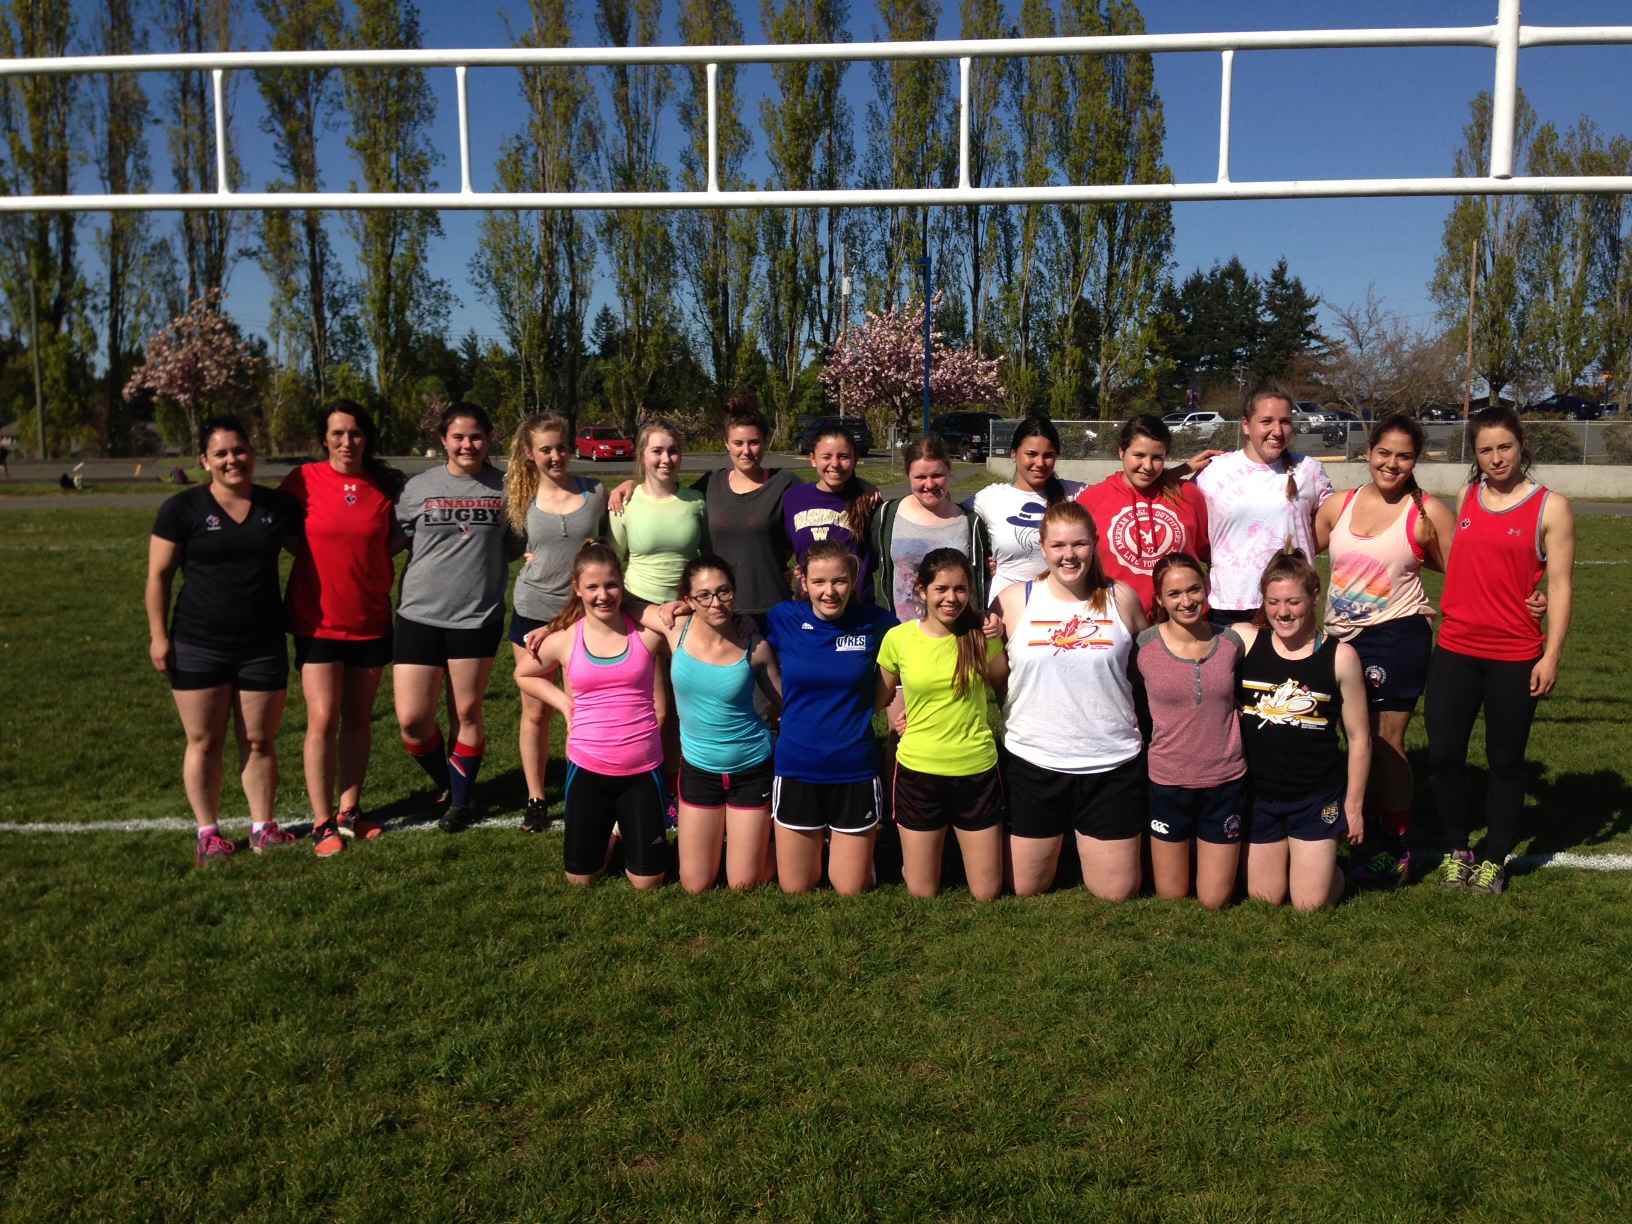 Girls Rugby